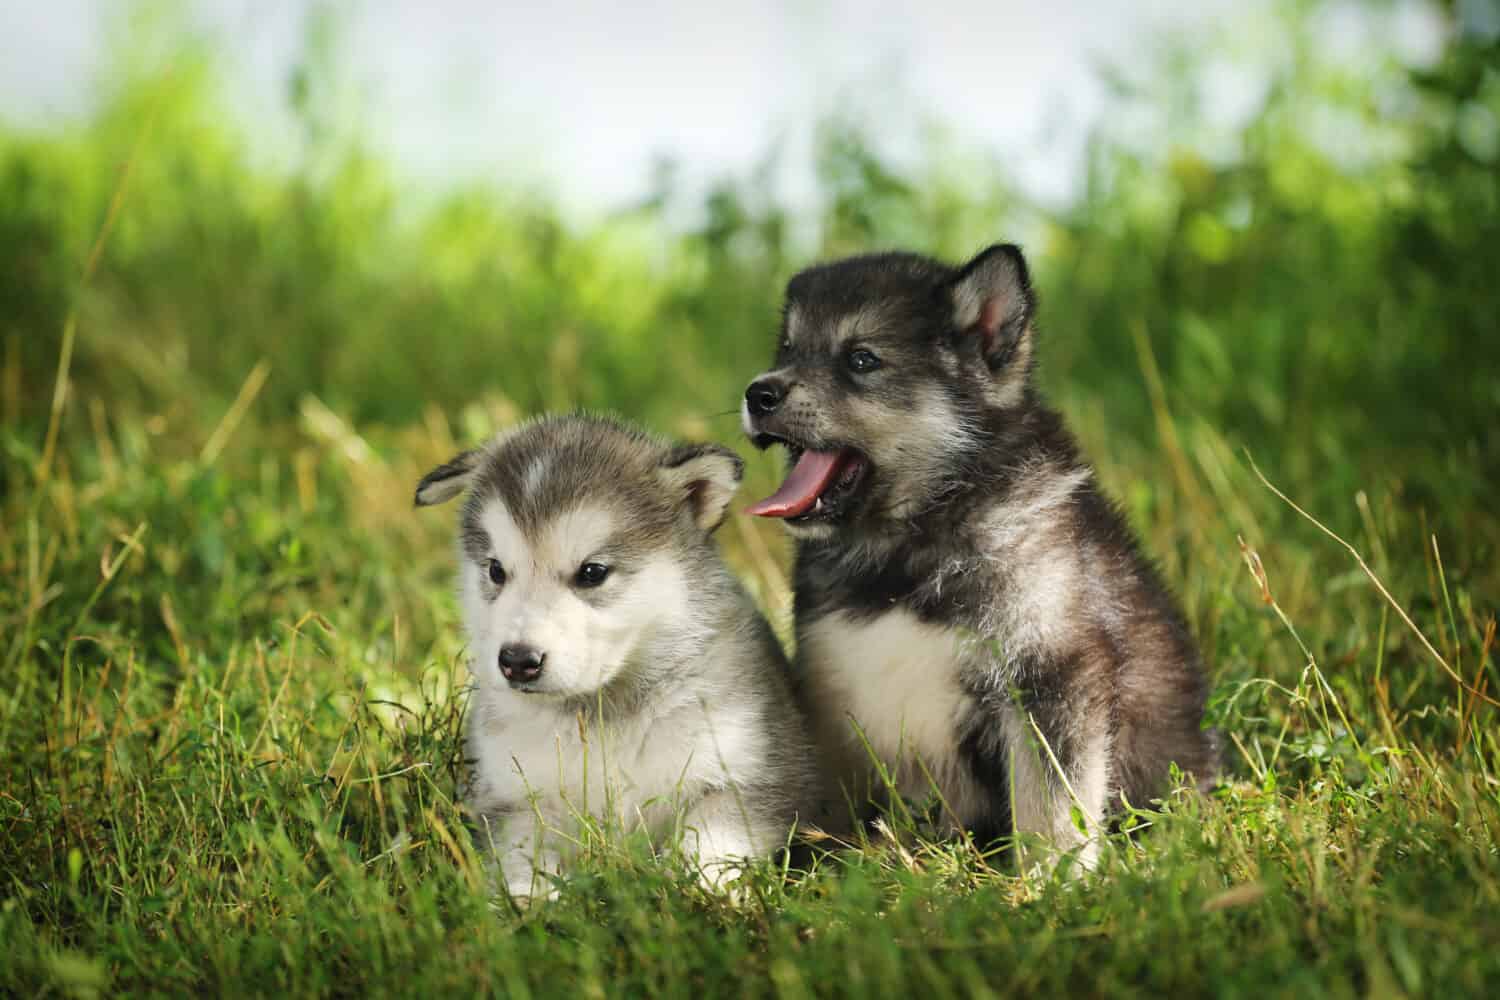 Two puppy. Puppies Malamute coat color agouti and white-grey.